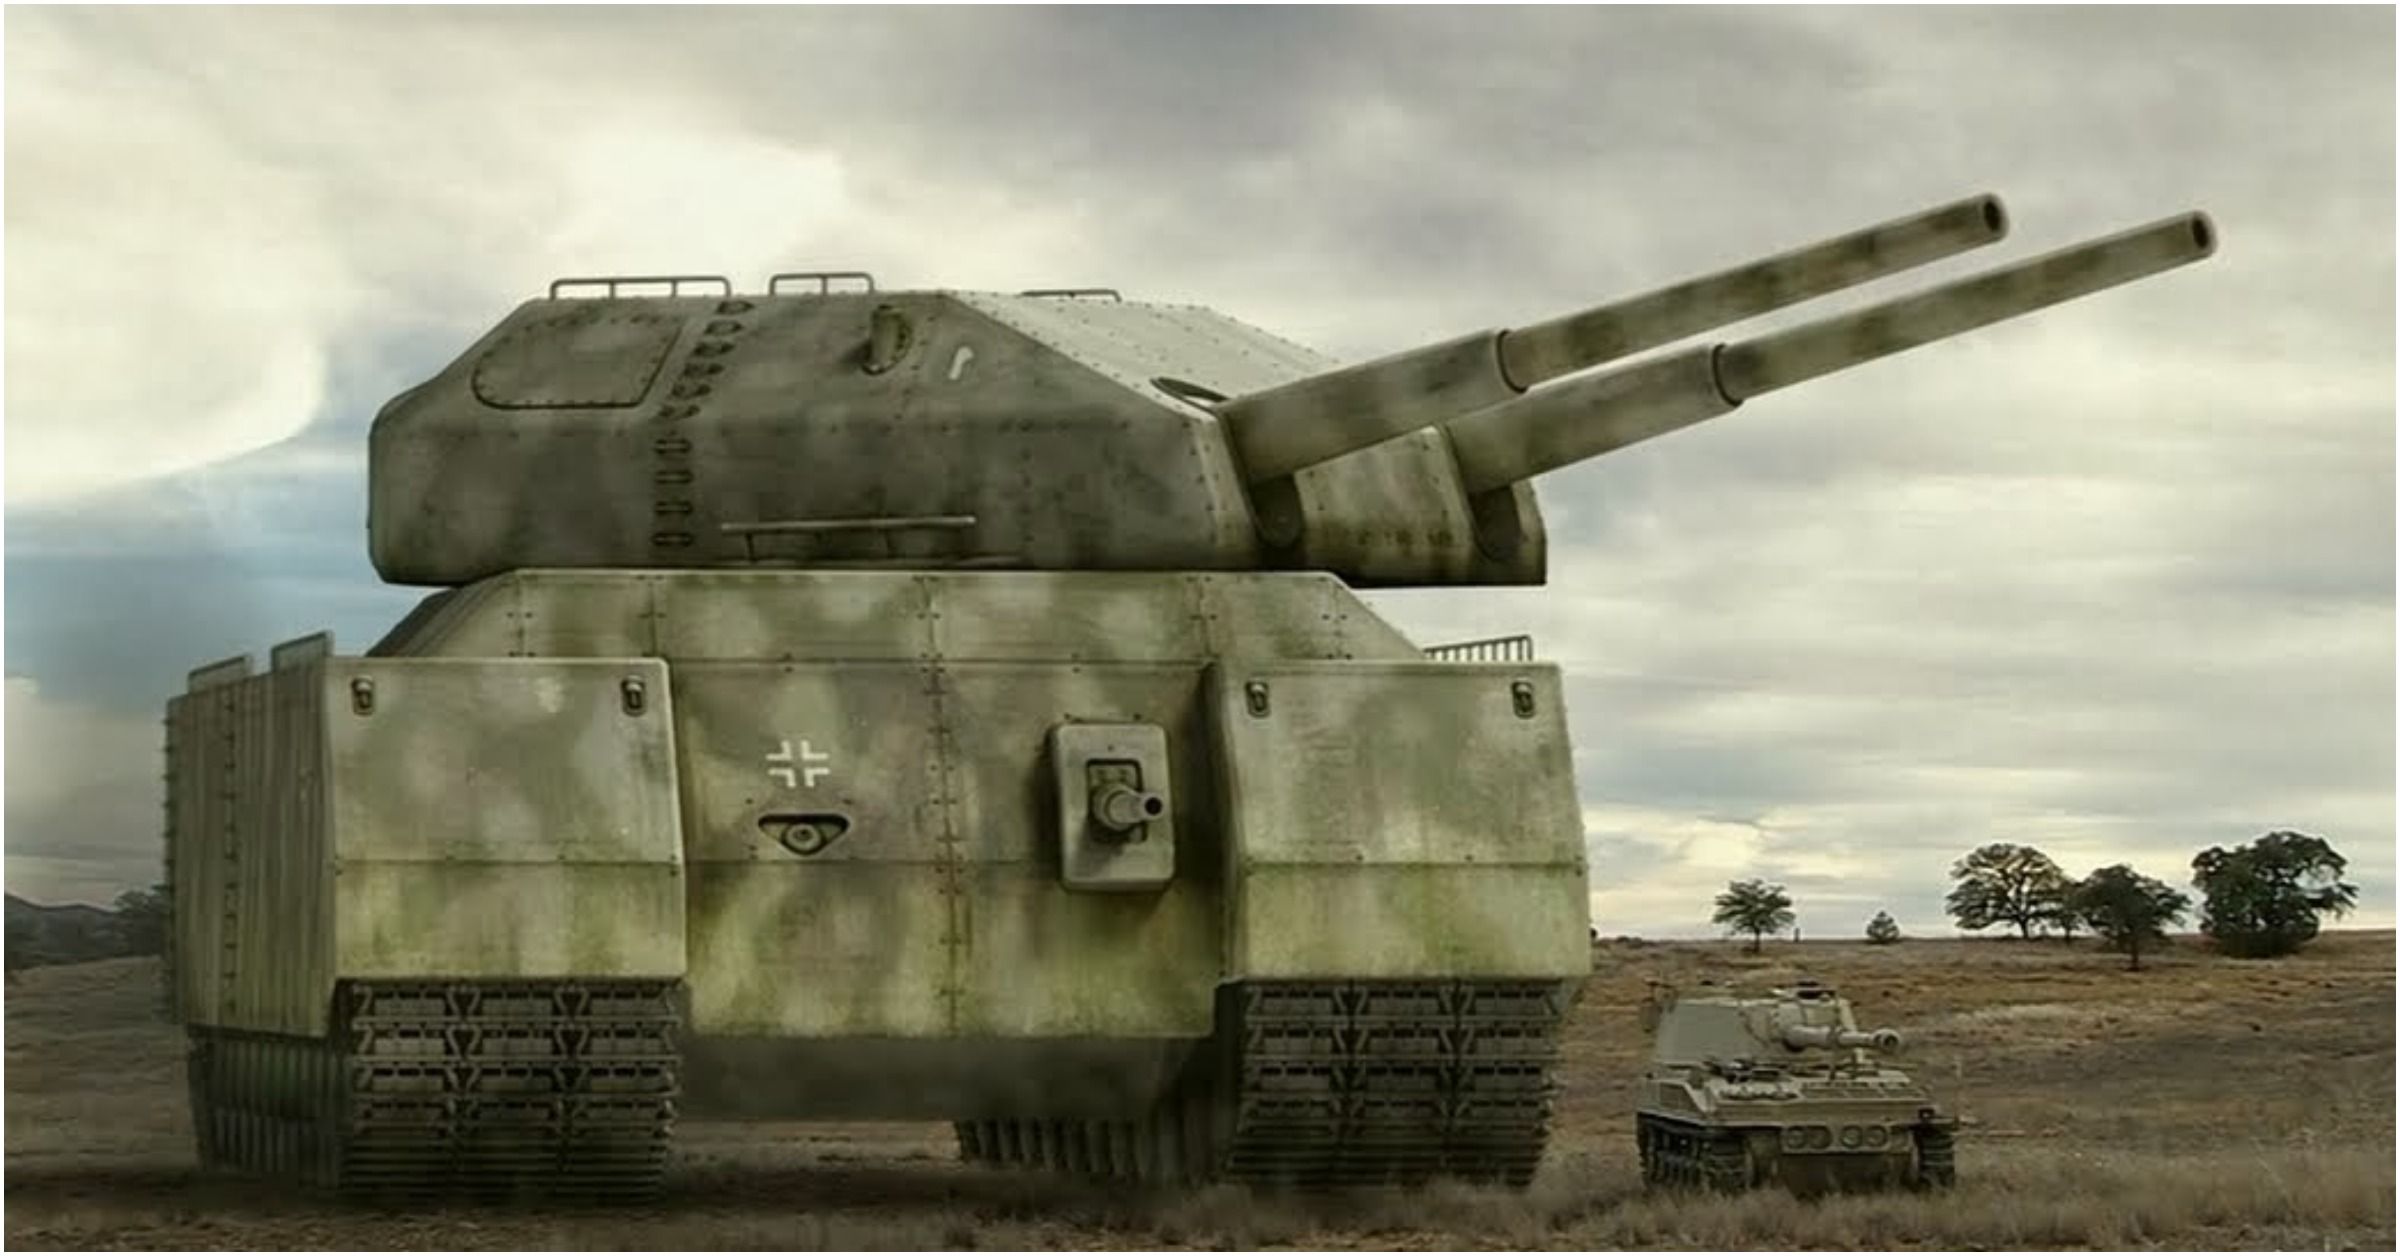 most modern 72 tank in the world